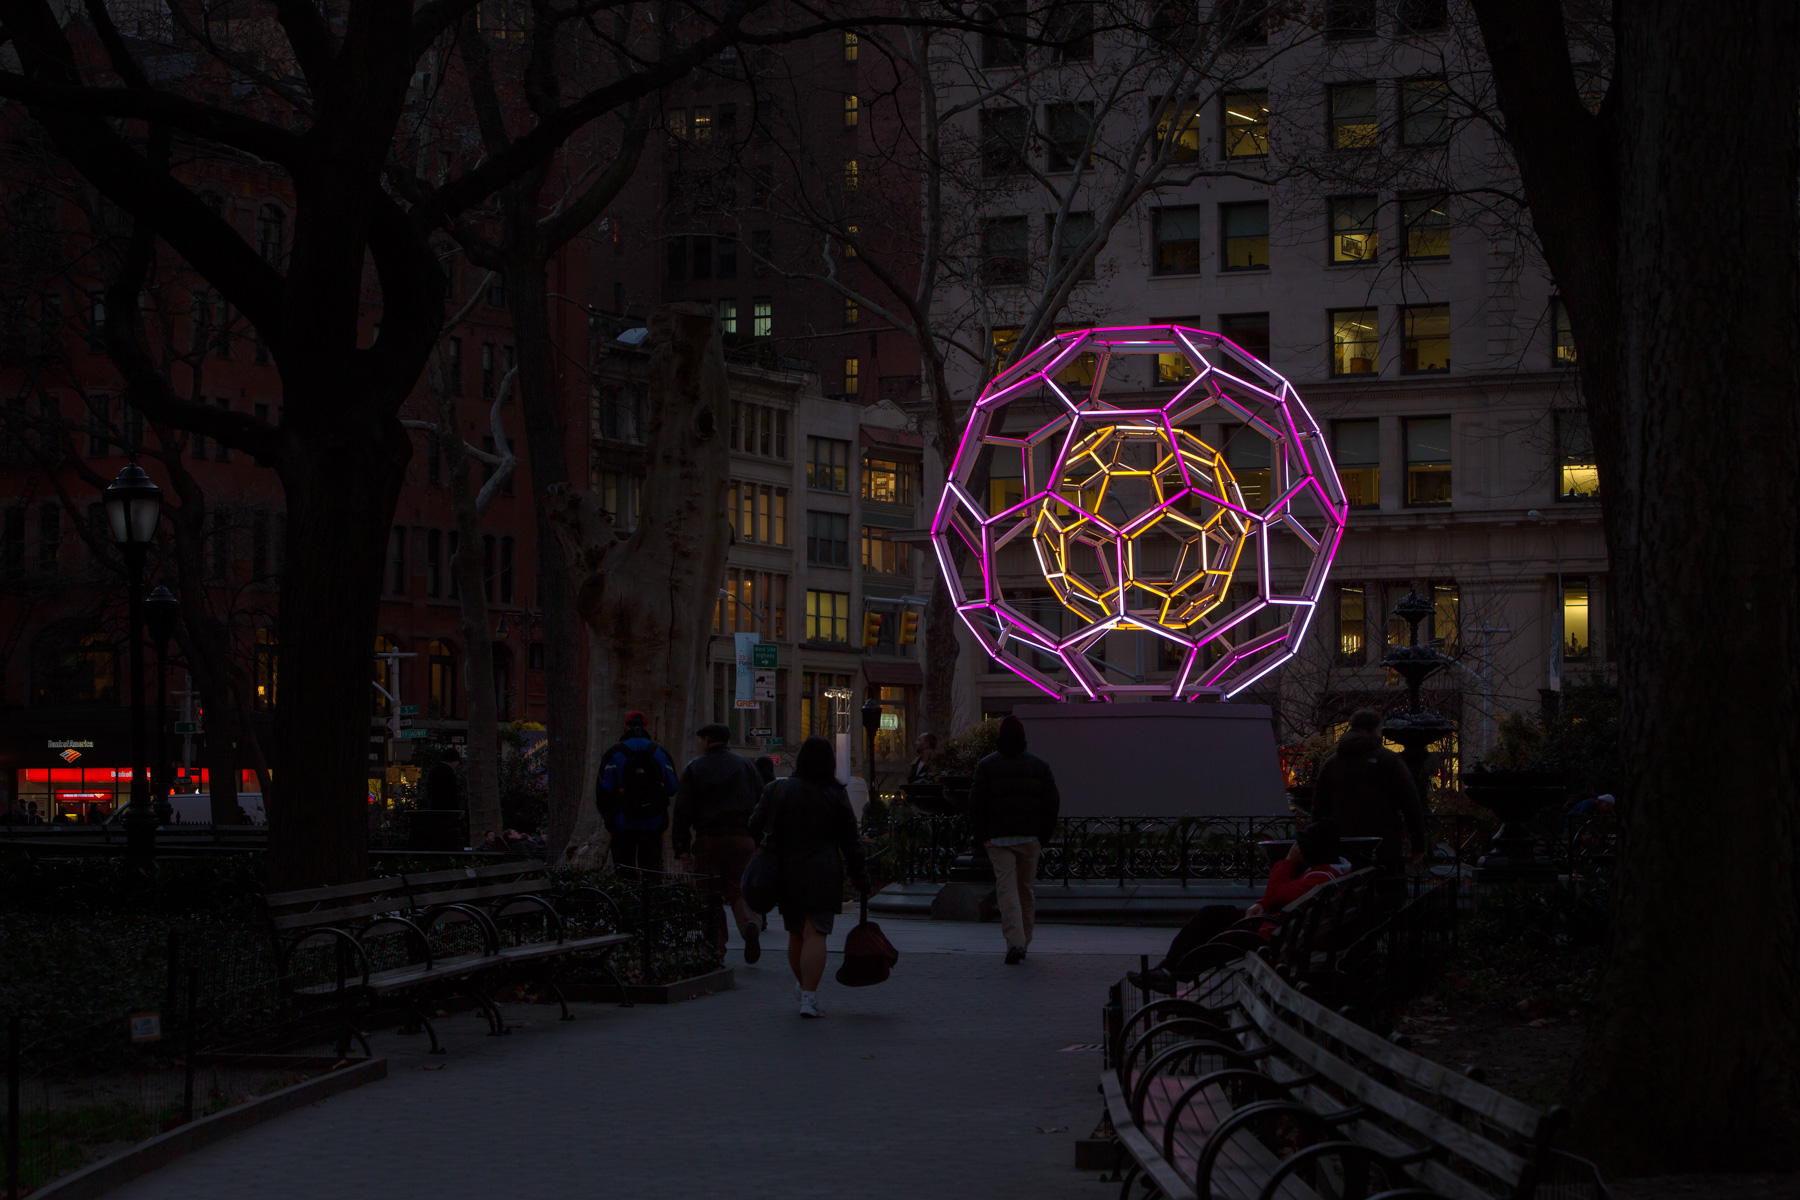 Buckyball Sculpture in NYC